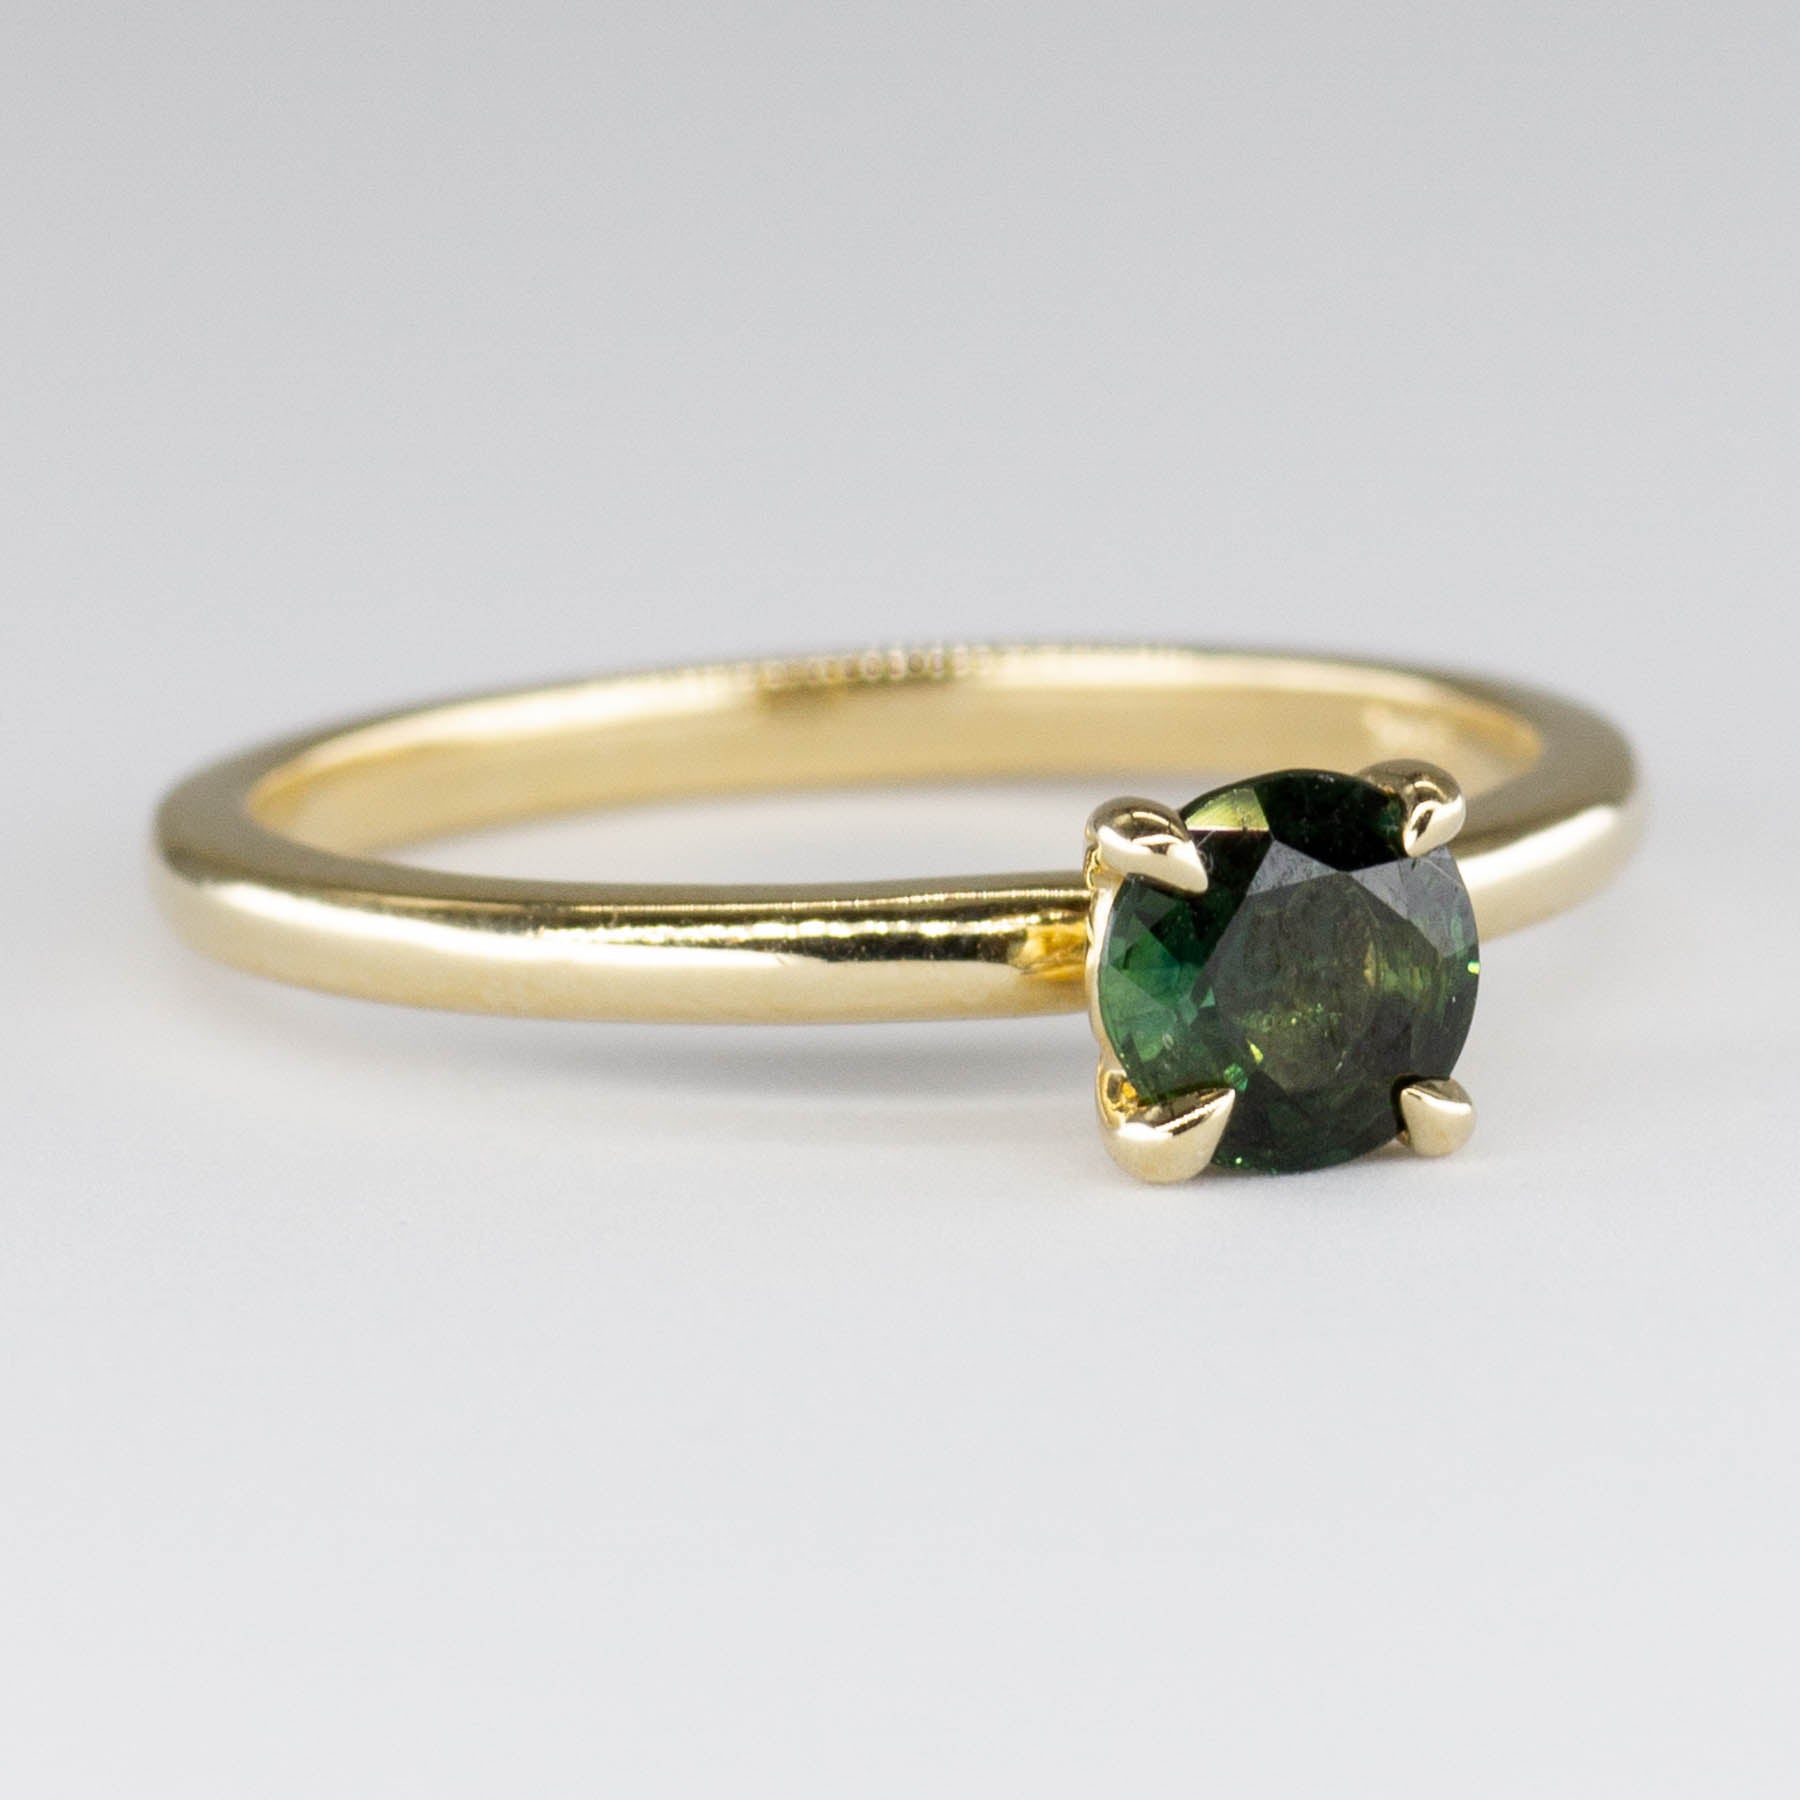 '100 Ways' 14k Yellow Gold Sapphire Solitaire Ring | 0.30ct | SZ 6.75 - 100 Ways